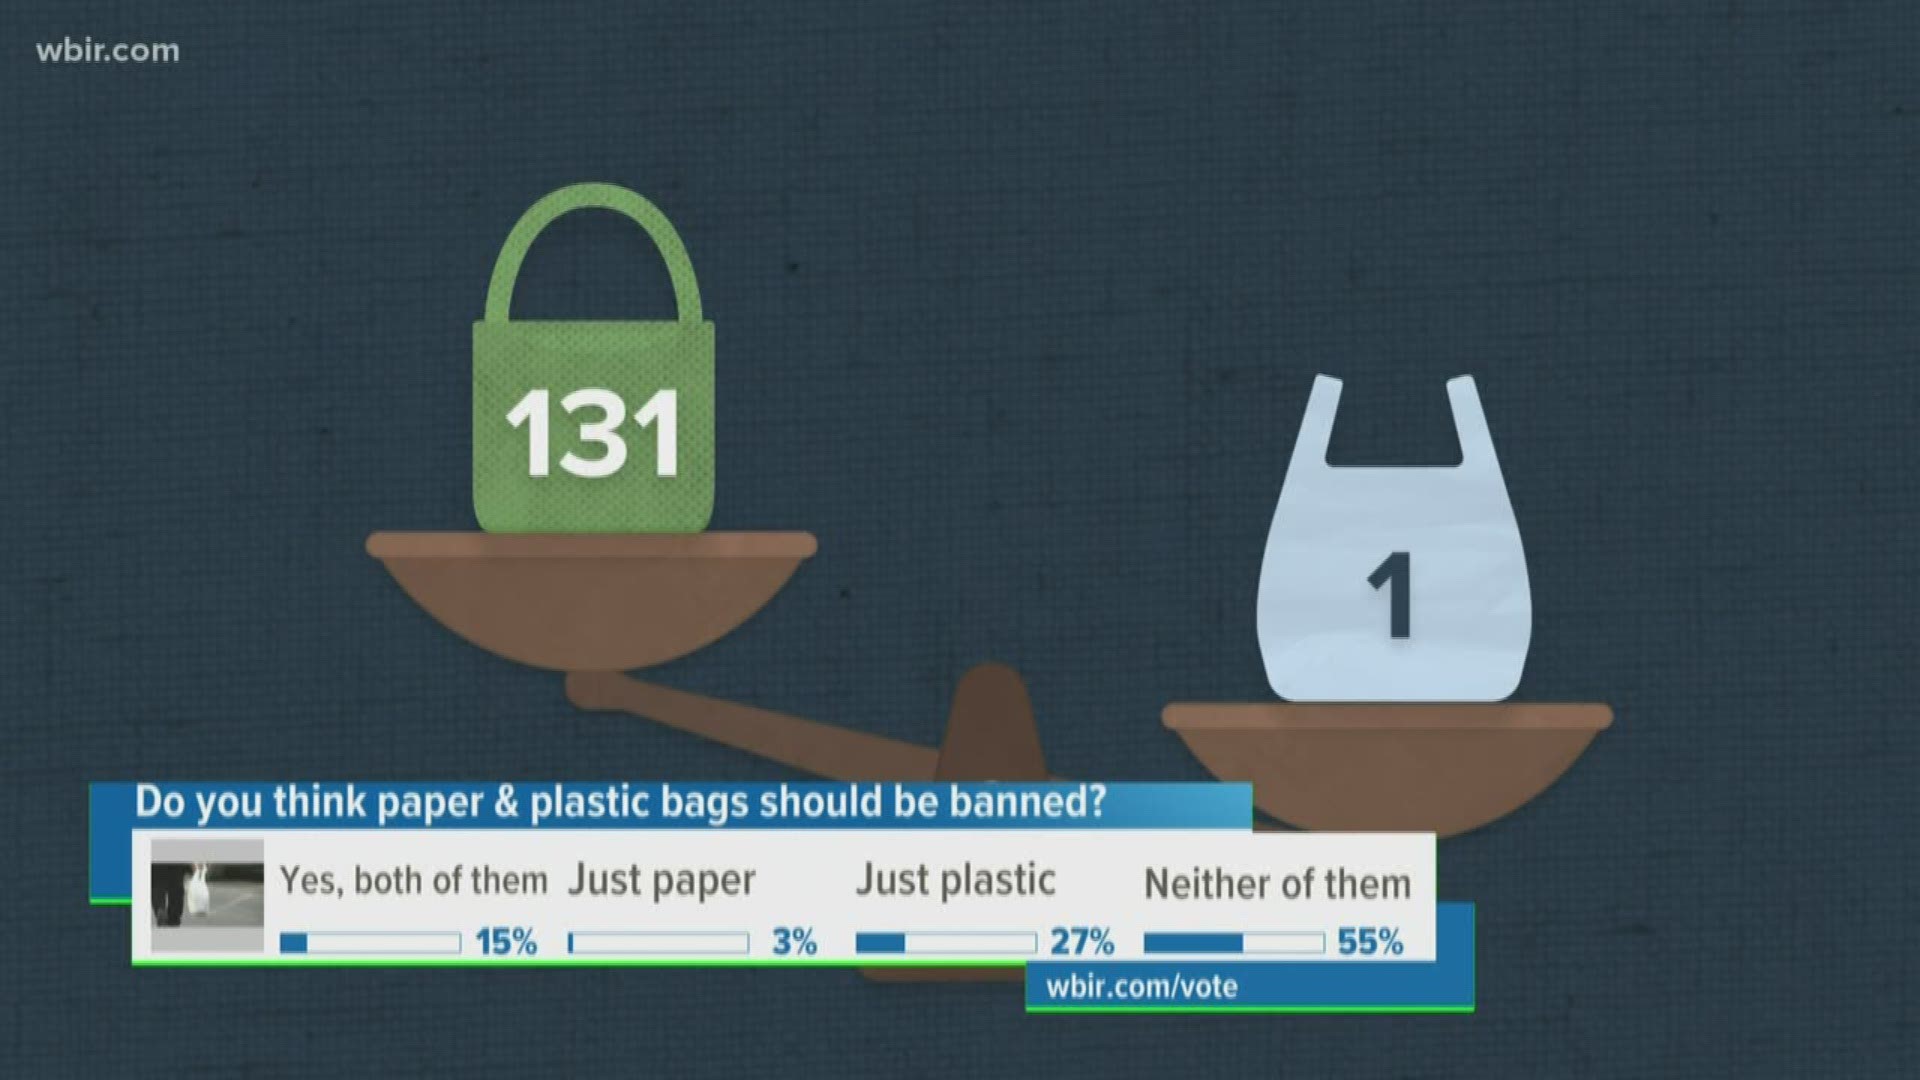 Tenn. is considered a ban on plastic & paper bags at stores. But what are the real environmental impacts of those bags and are reusable ones really much better?